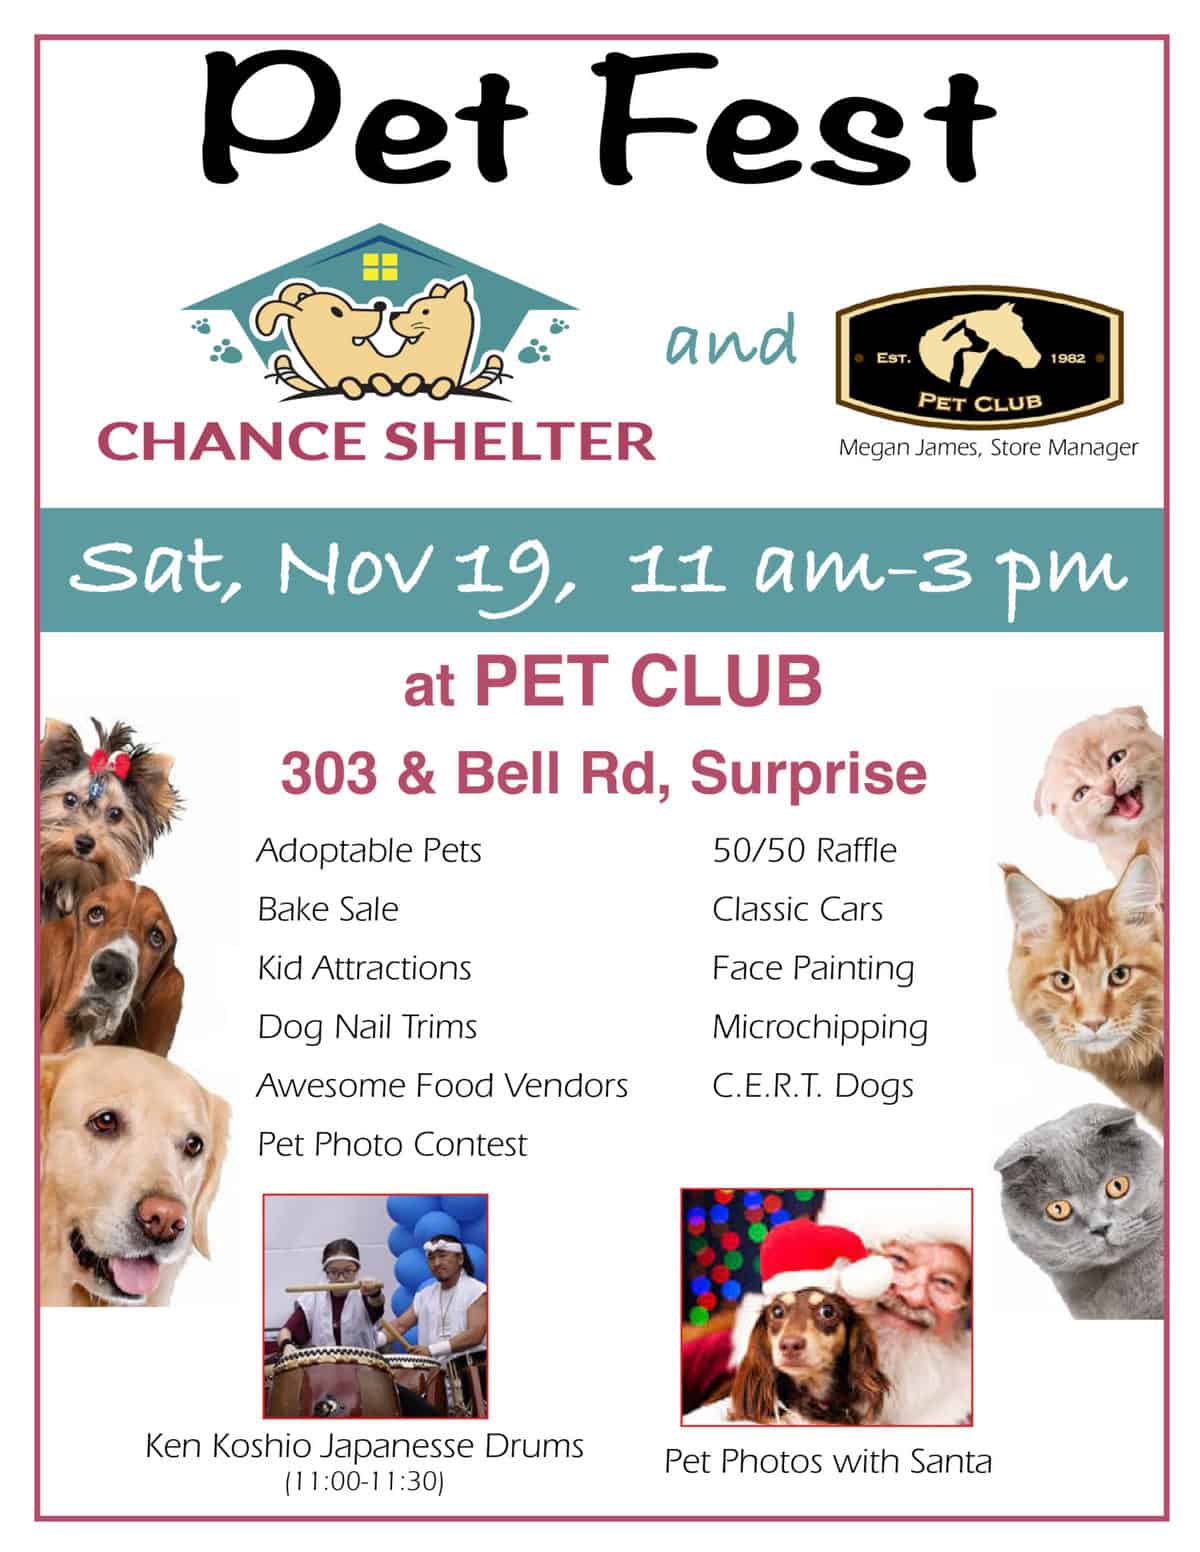 Pet Fest Is So Much More Than An Adoption Event Chance Shelter